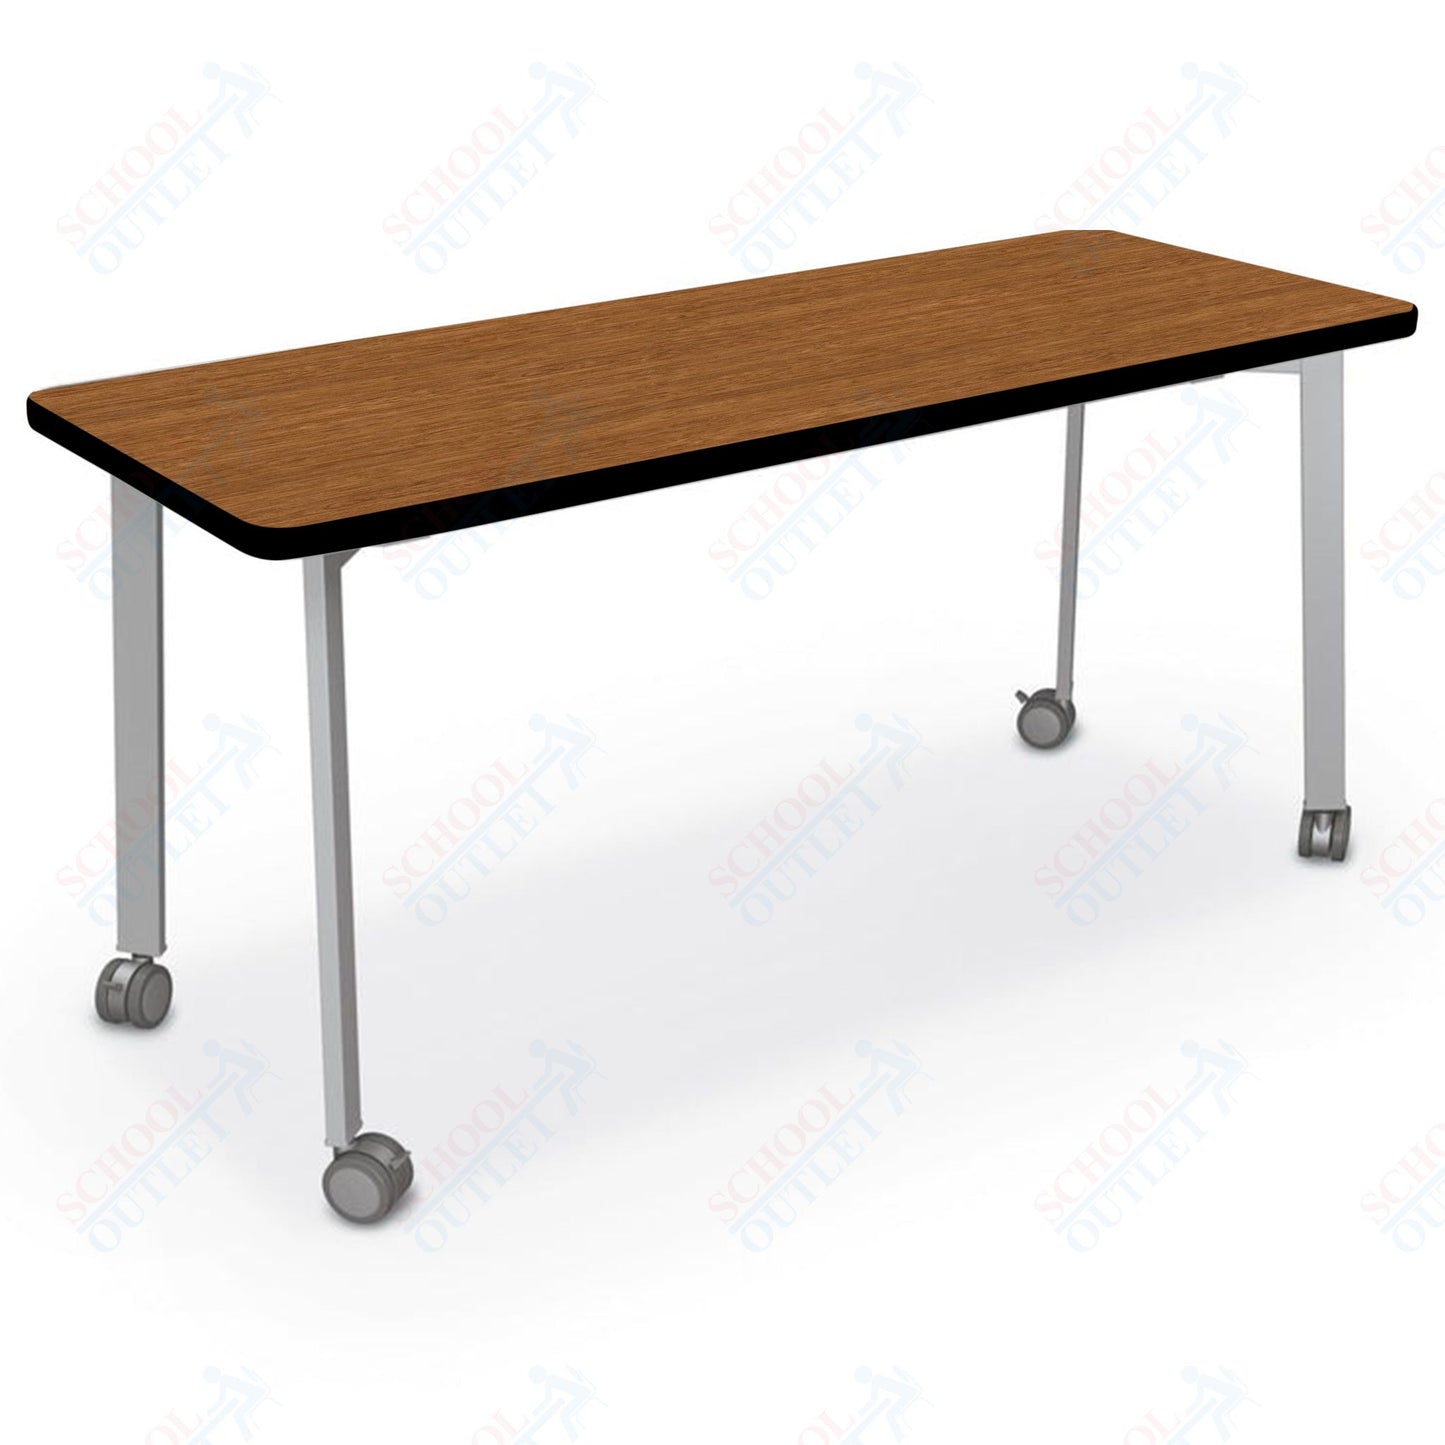 Mooreco Akt Table – 24"D x 60"W Rectangle, Laminate or Butcher Block Top , Fixed Height Available in 29"H, 36"H, or 42"H